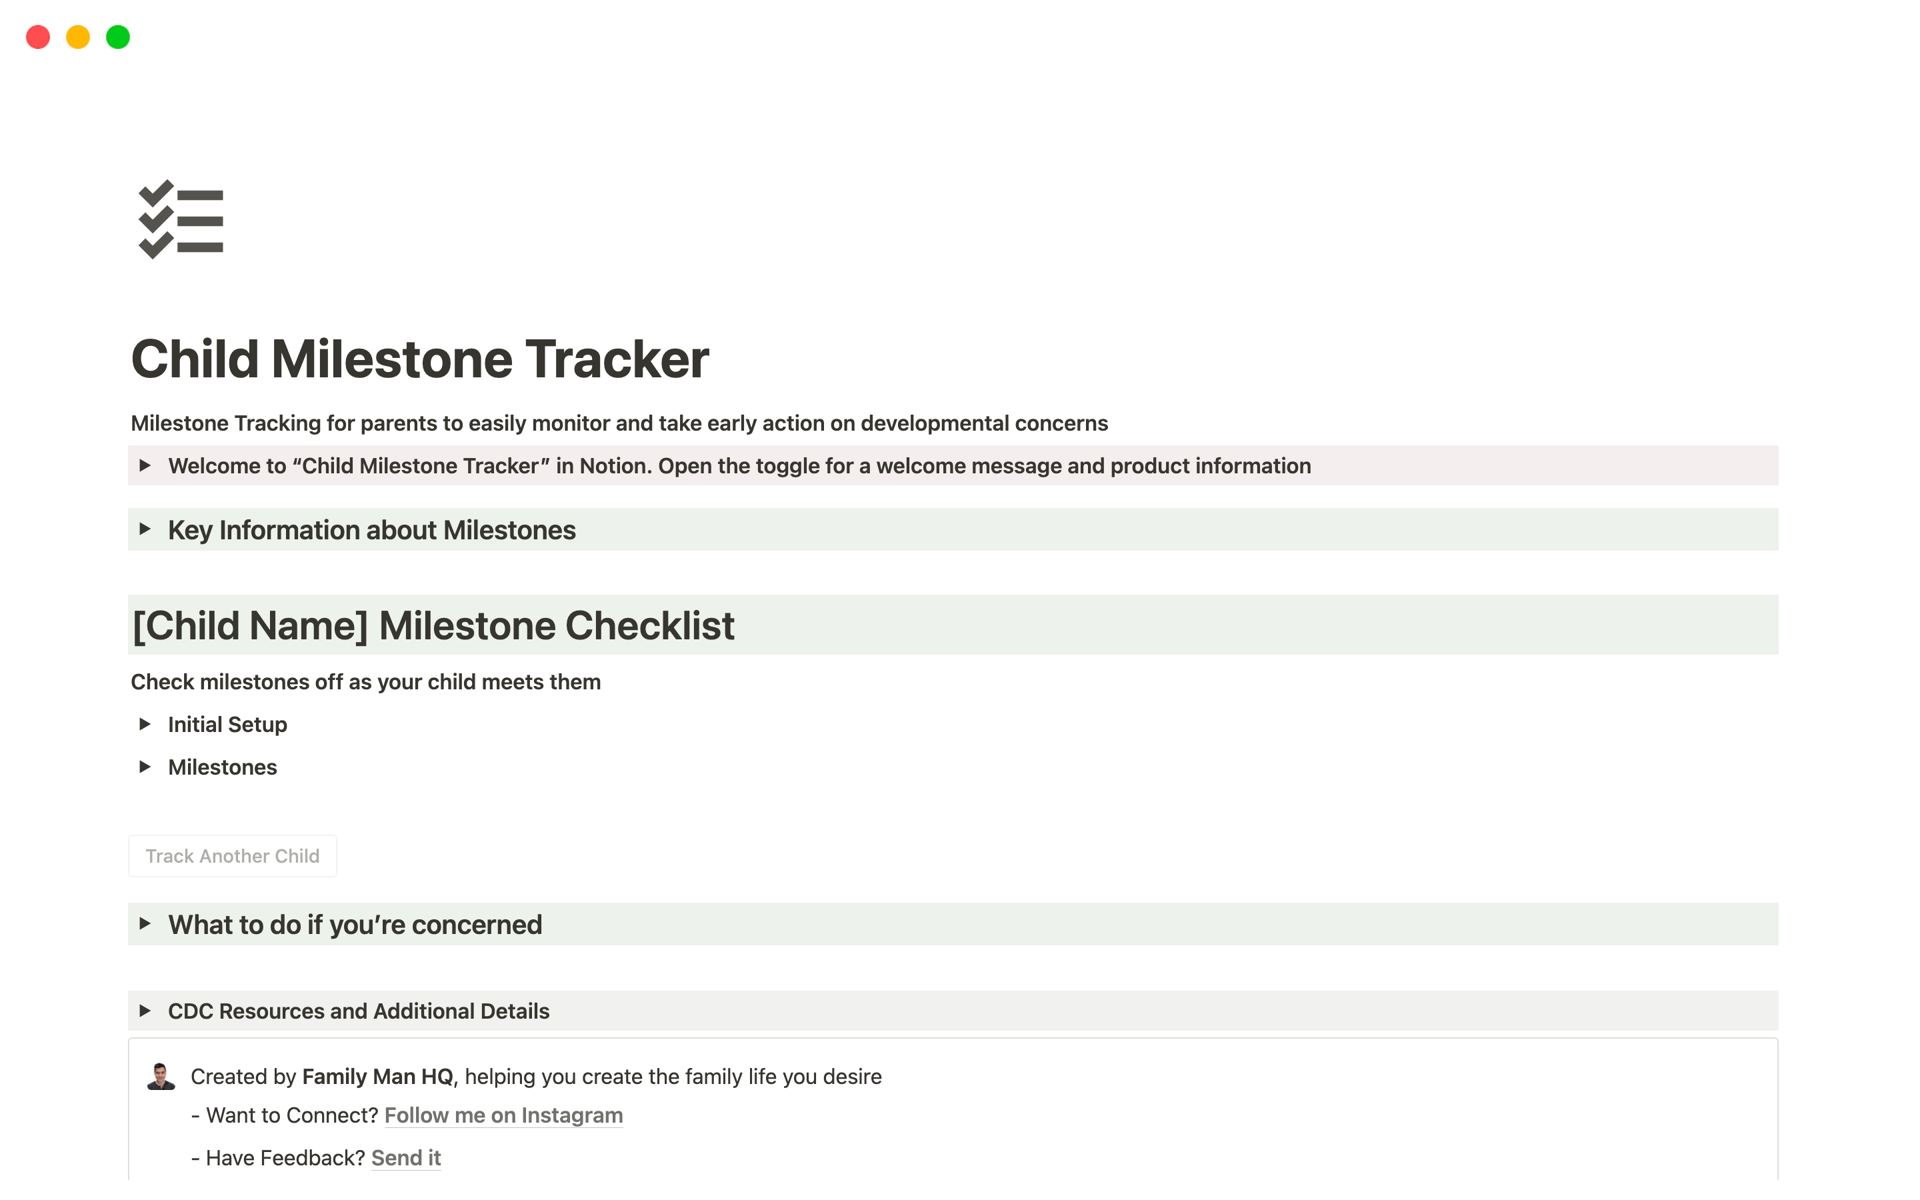 Free tracker for children development, using CDC milestone information (Ages 2 months to 5 yrs)